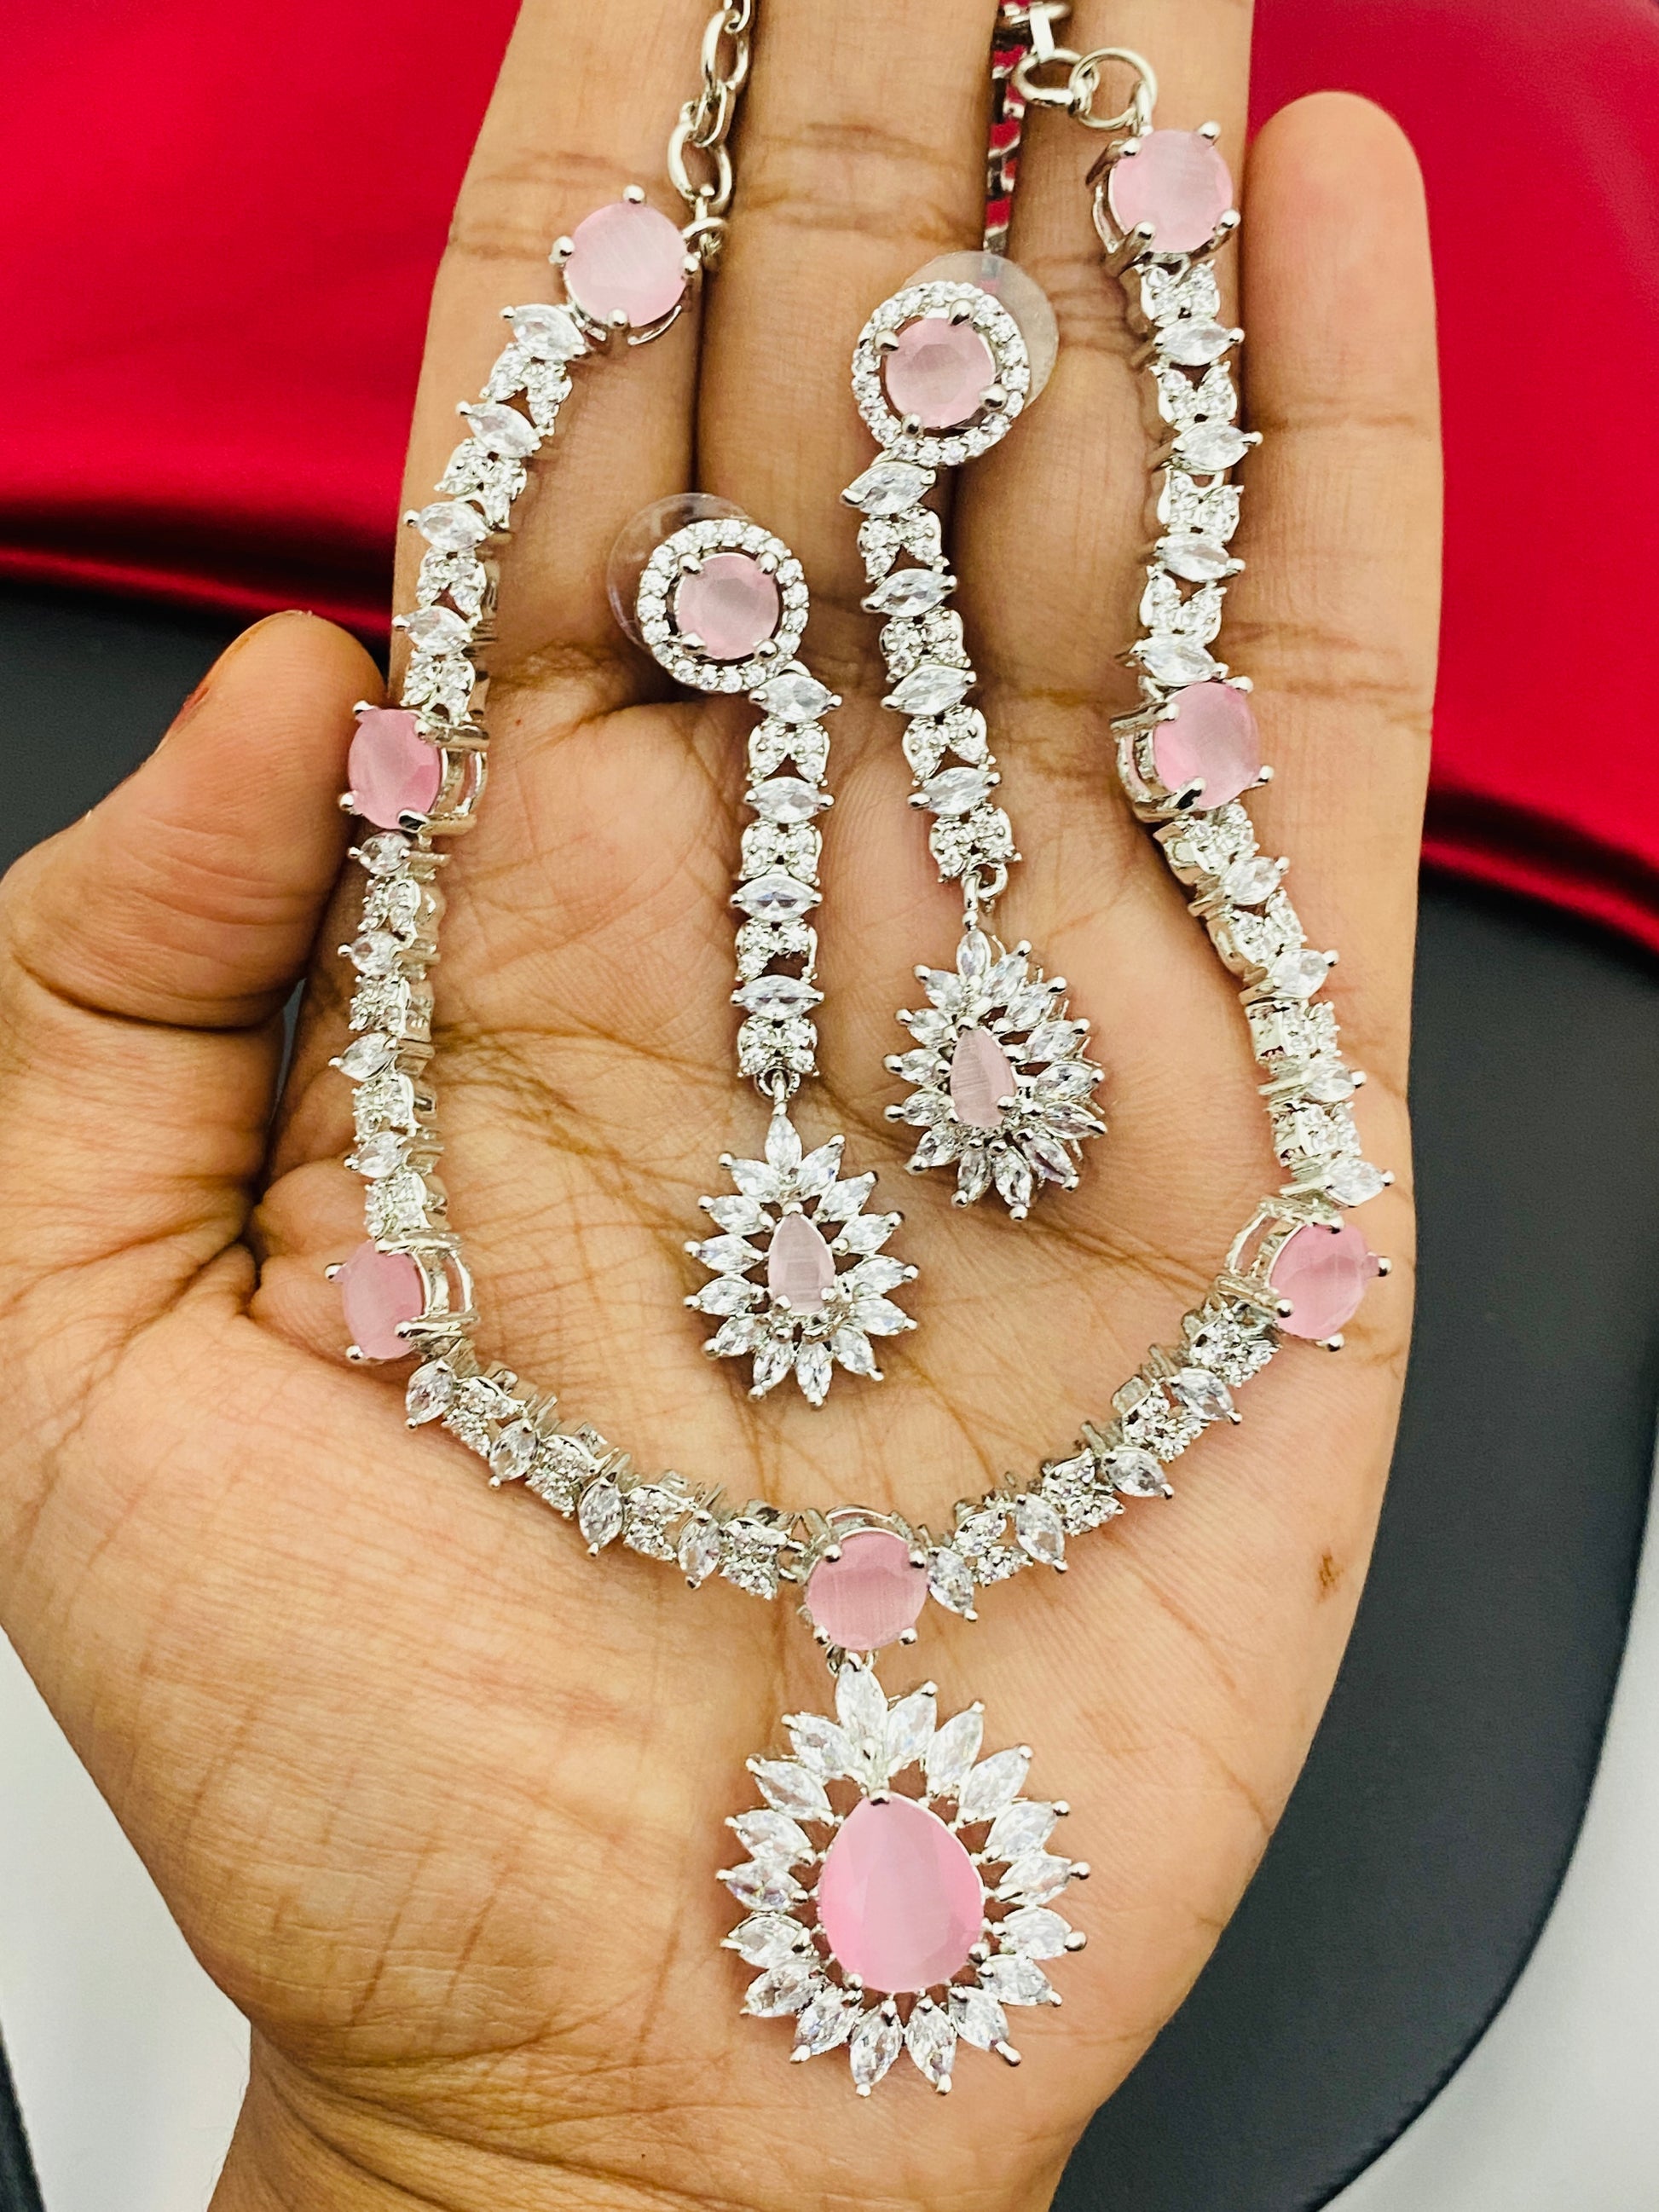 American Diamond Light Pink And White Stoned Necklace With Floral Designed Pendant In Tempe